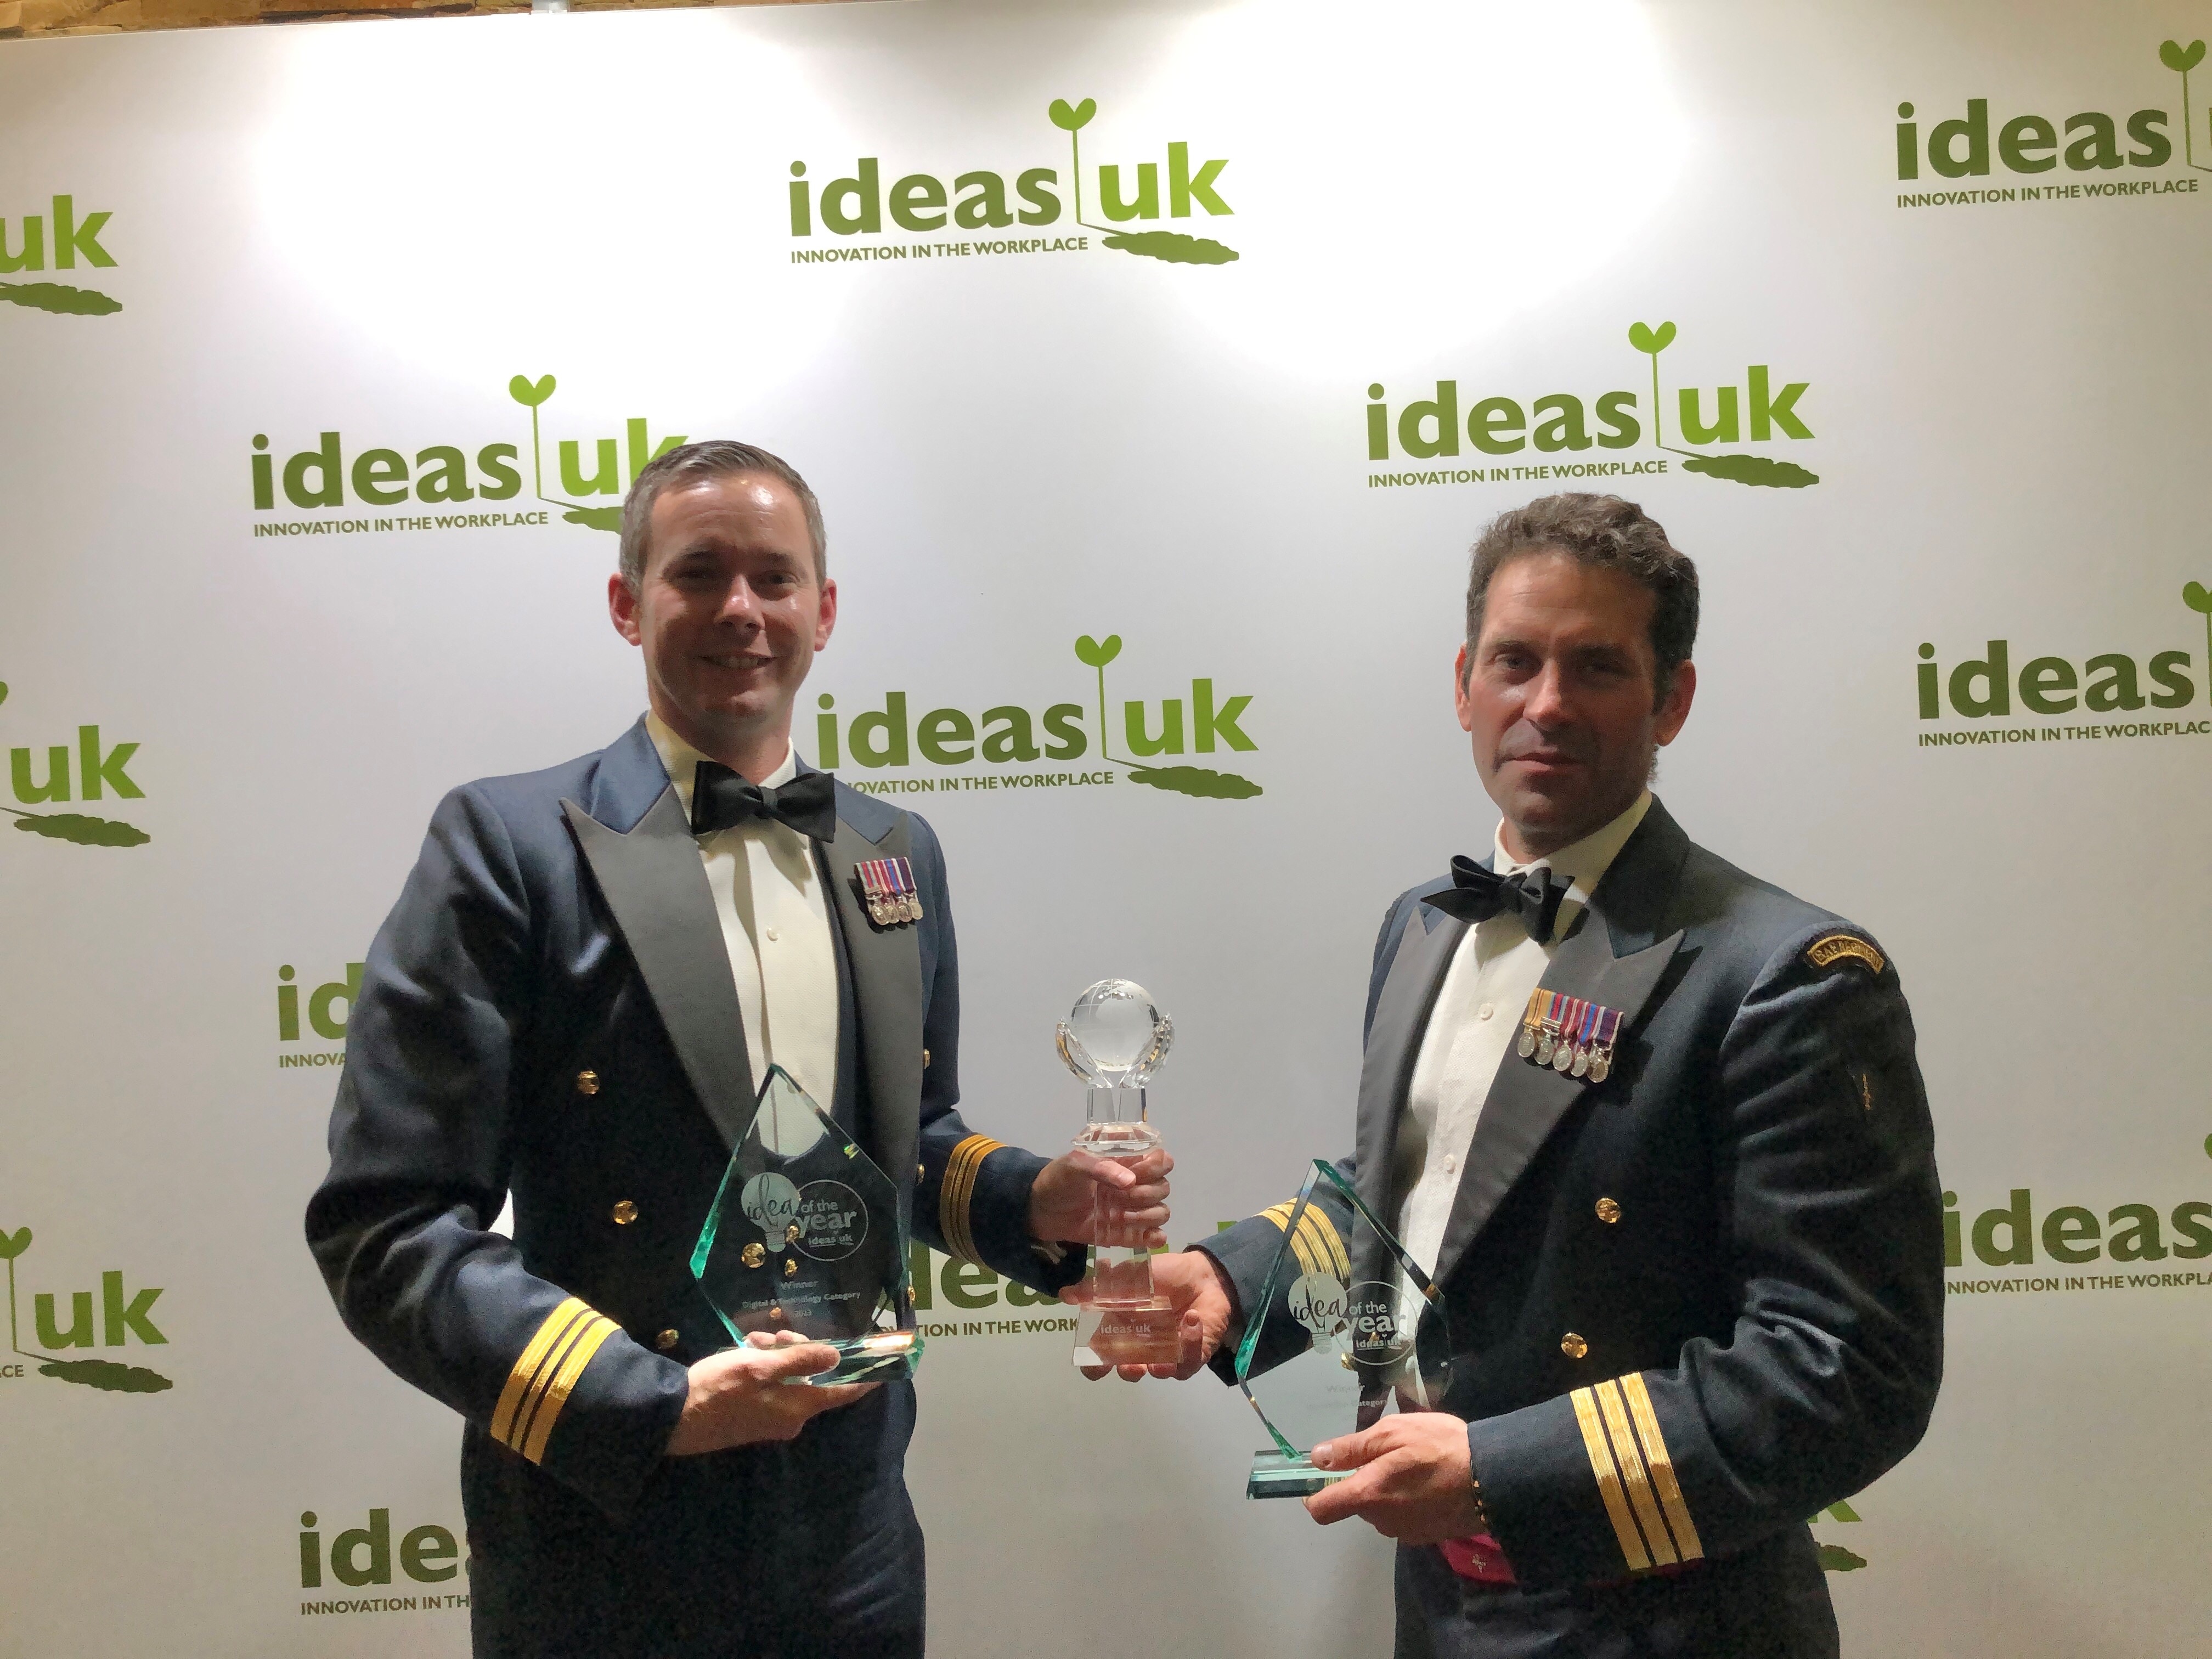 Wg Cdr Casson and Sqn Ldr Palfrey pose with their trophy